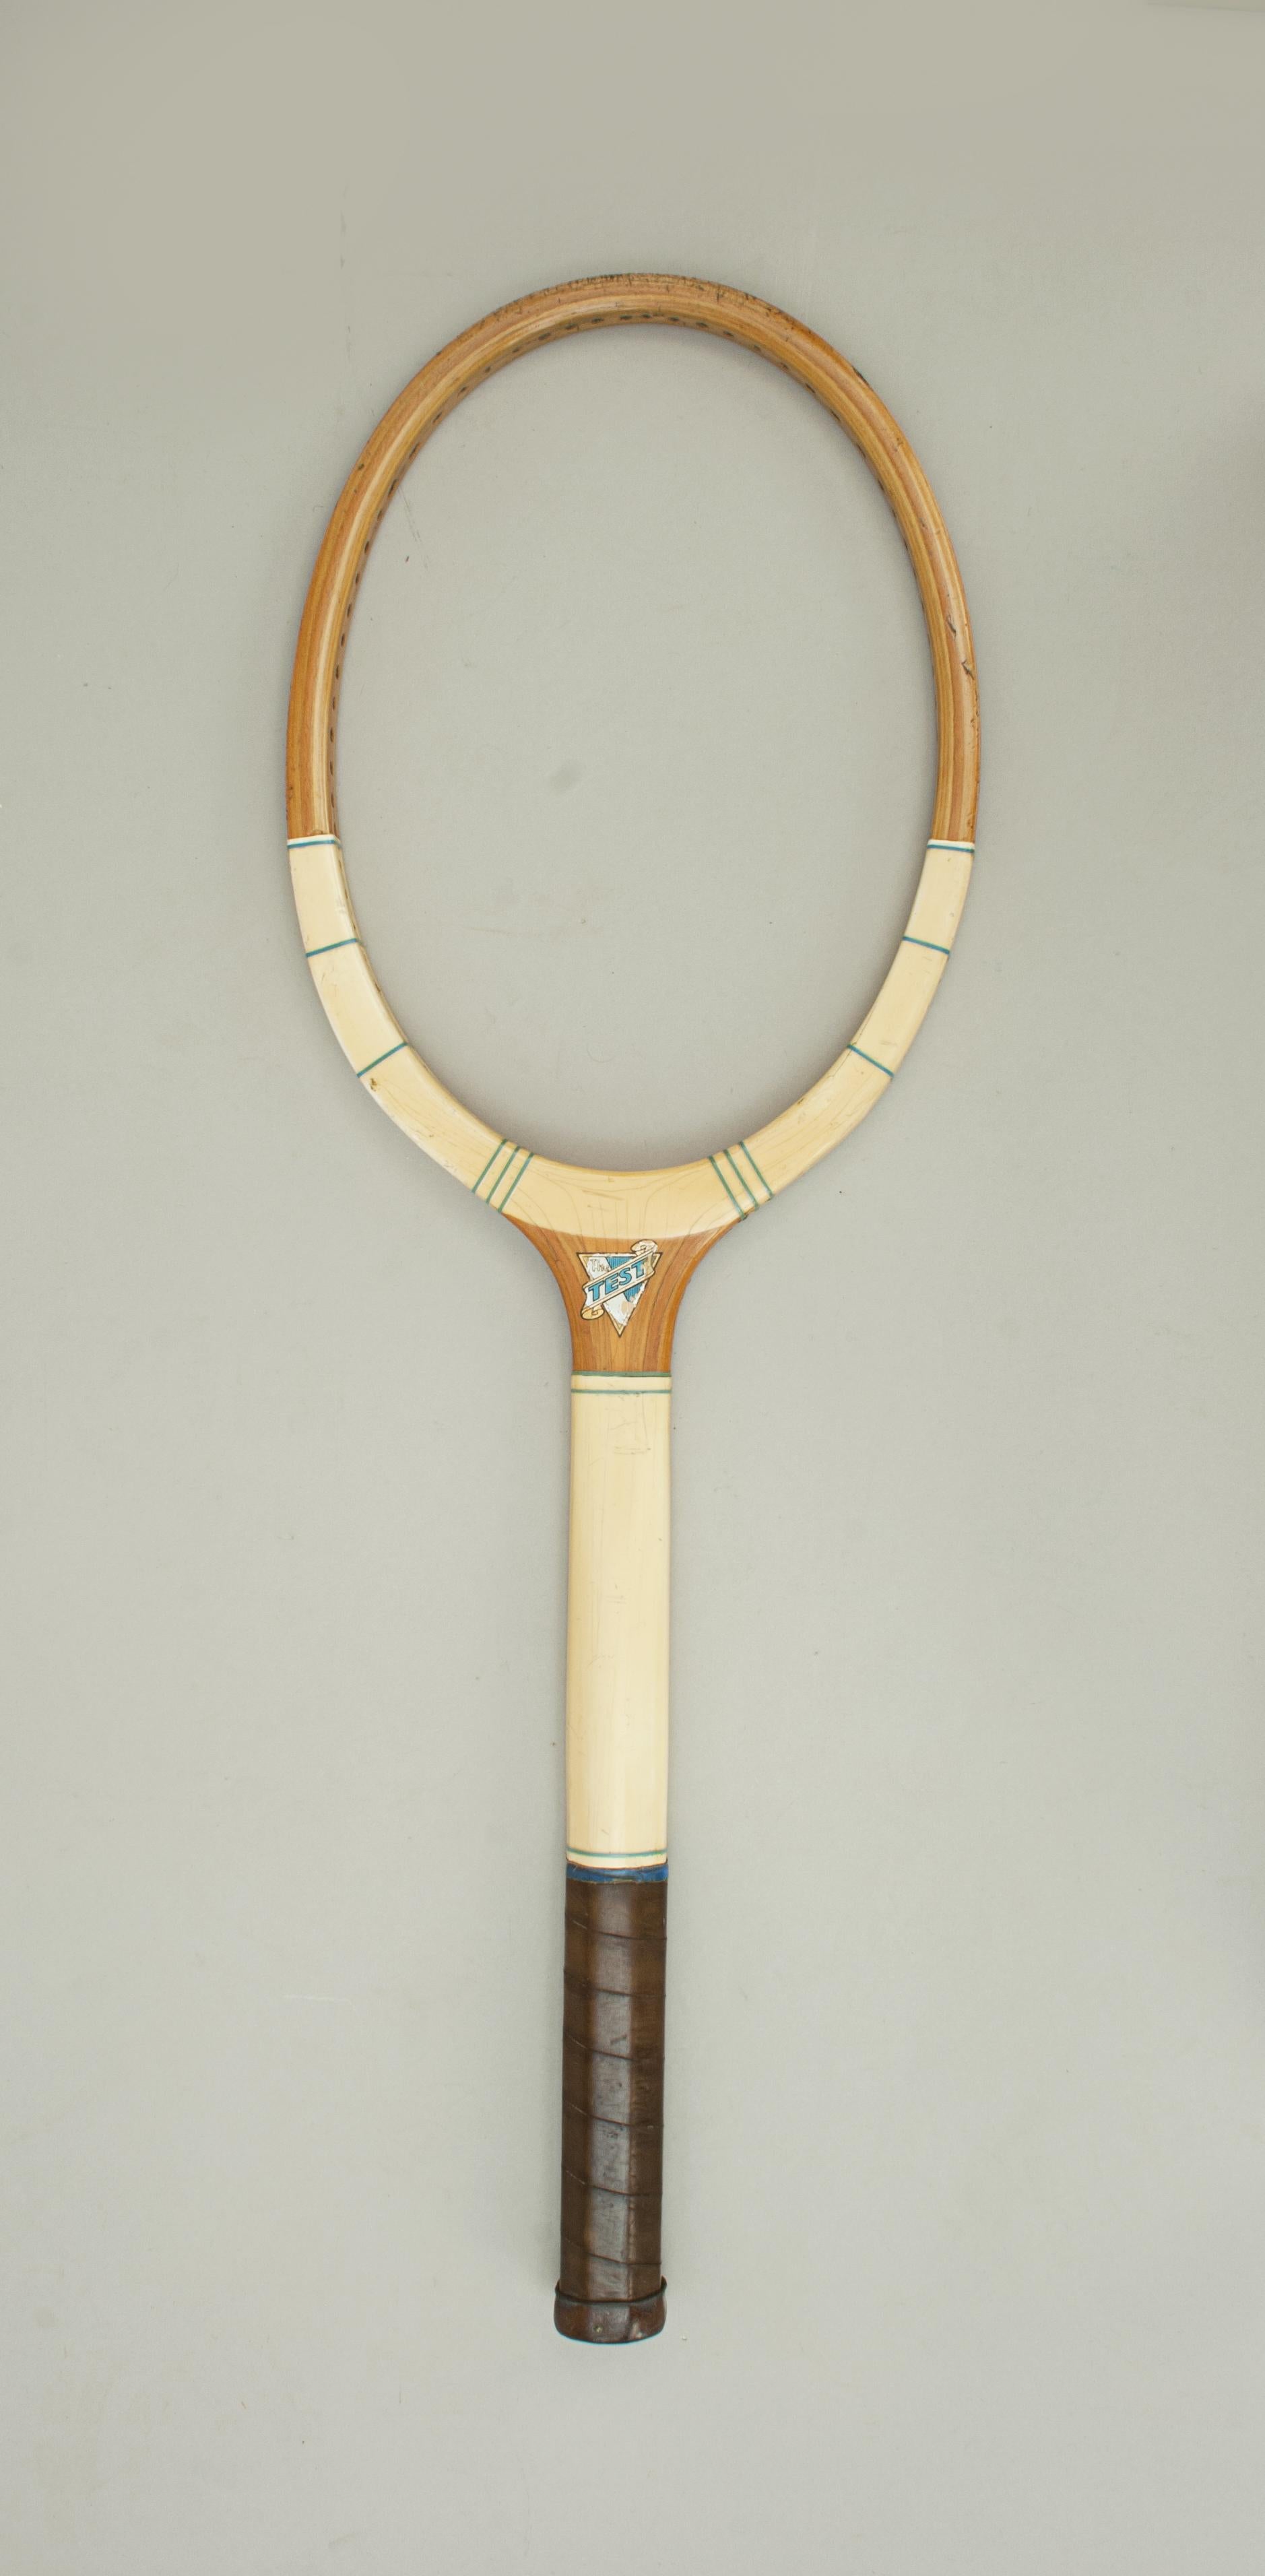 English Vintage Lawn Tennis Racket, the Test by Stevenson For Sale